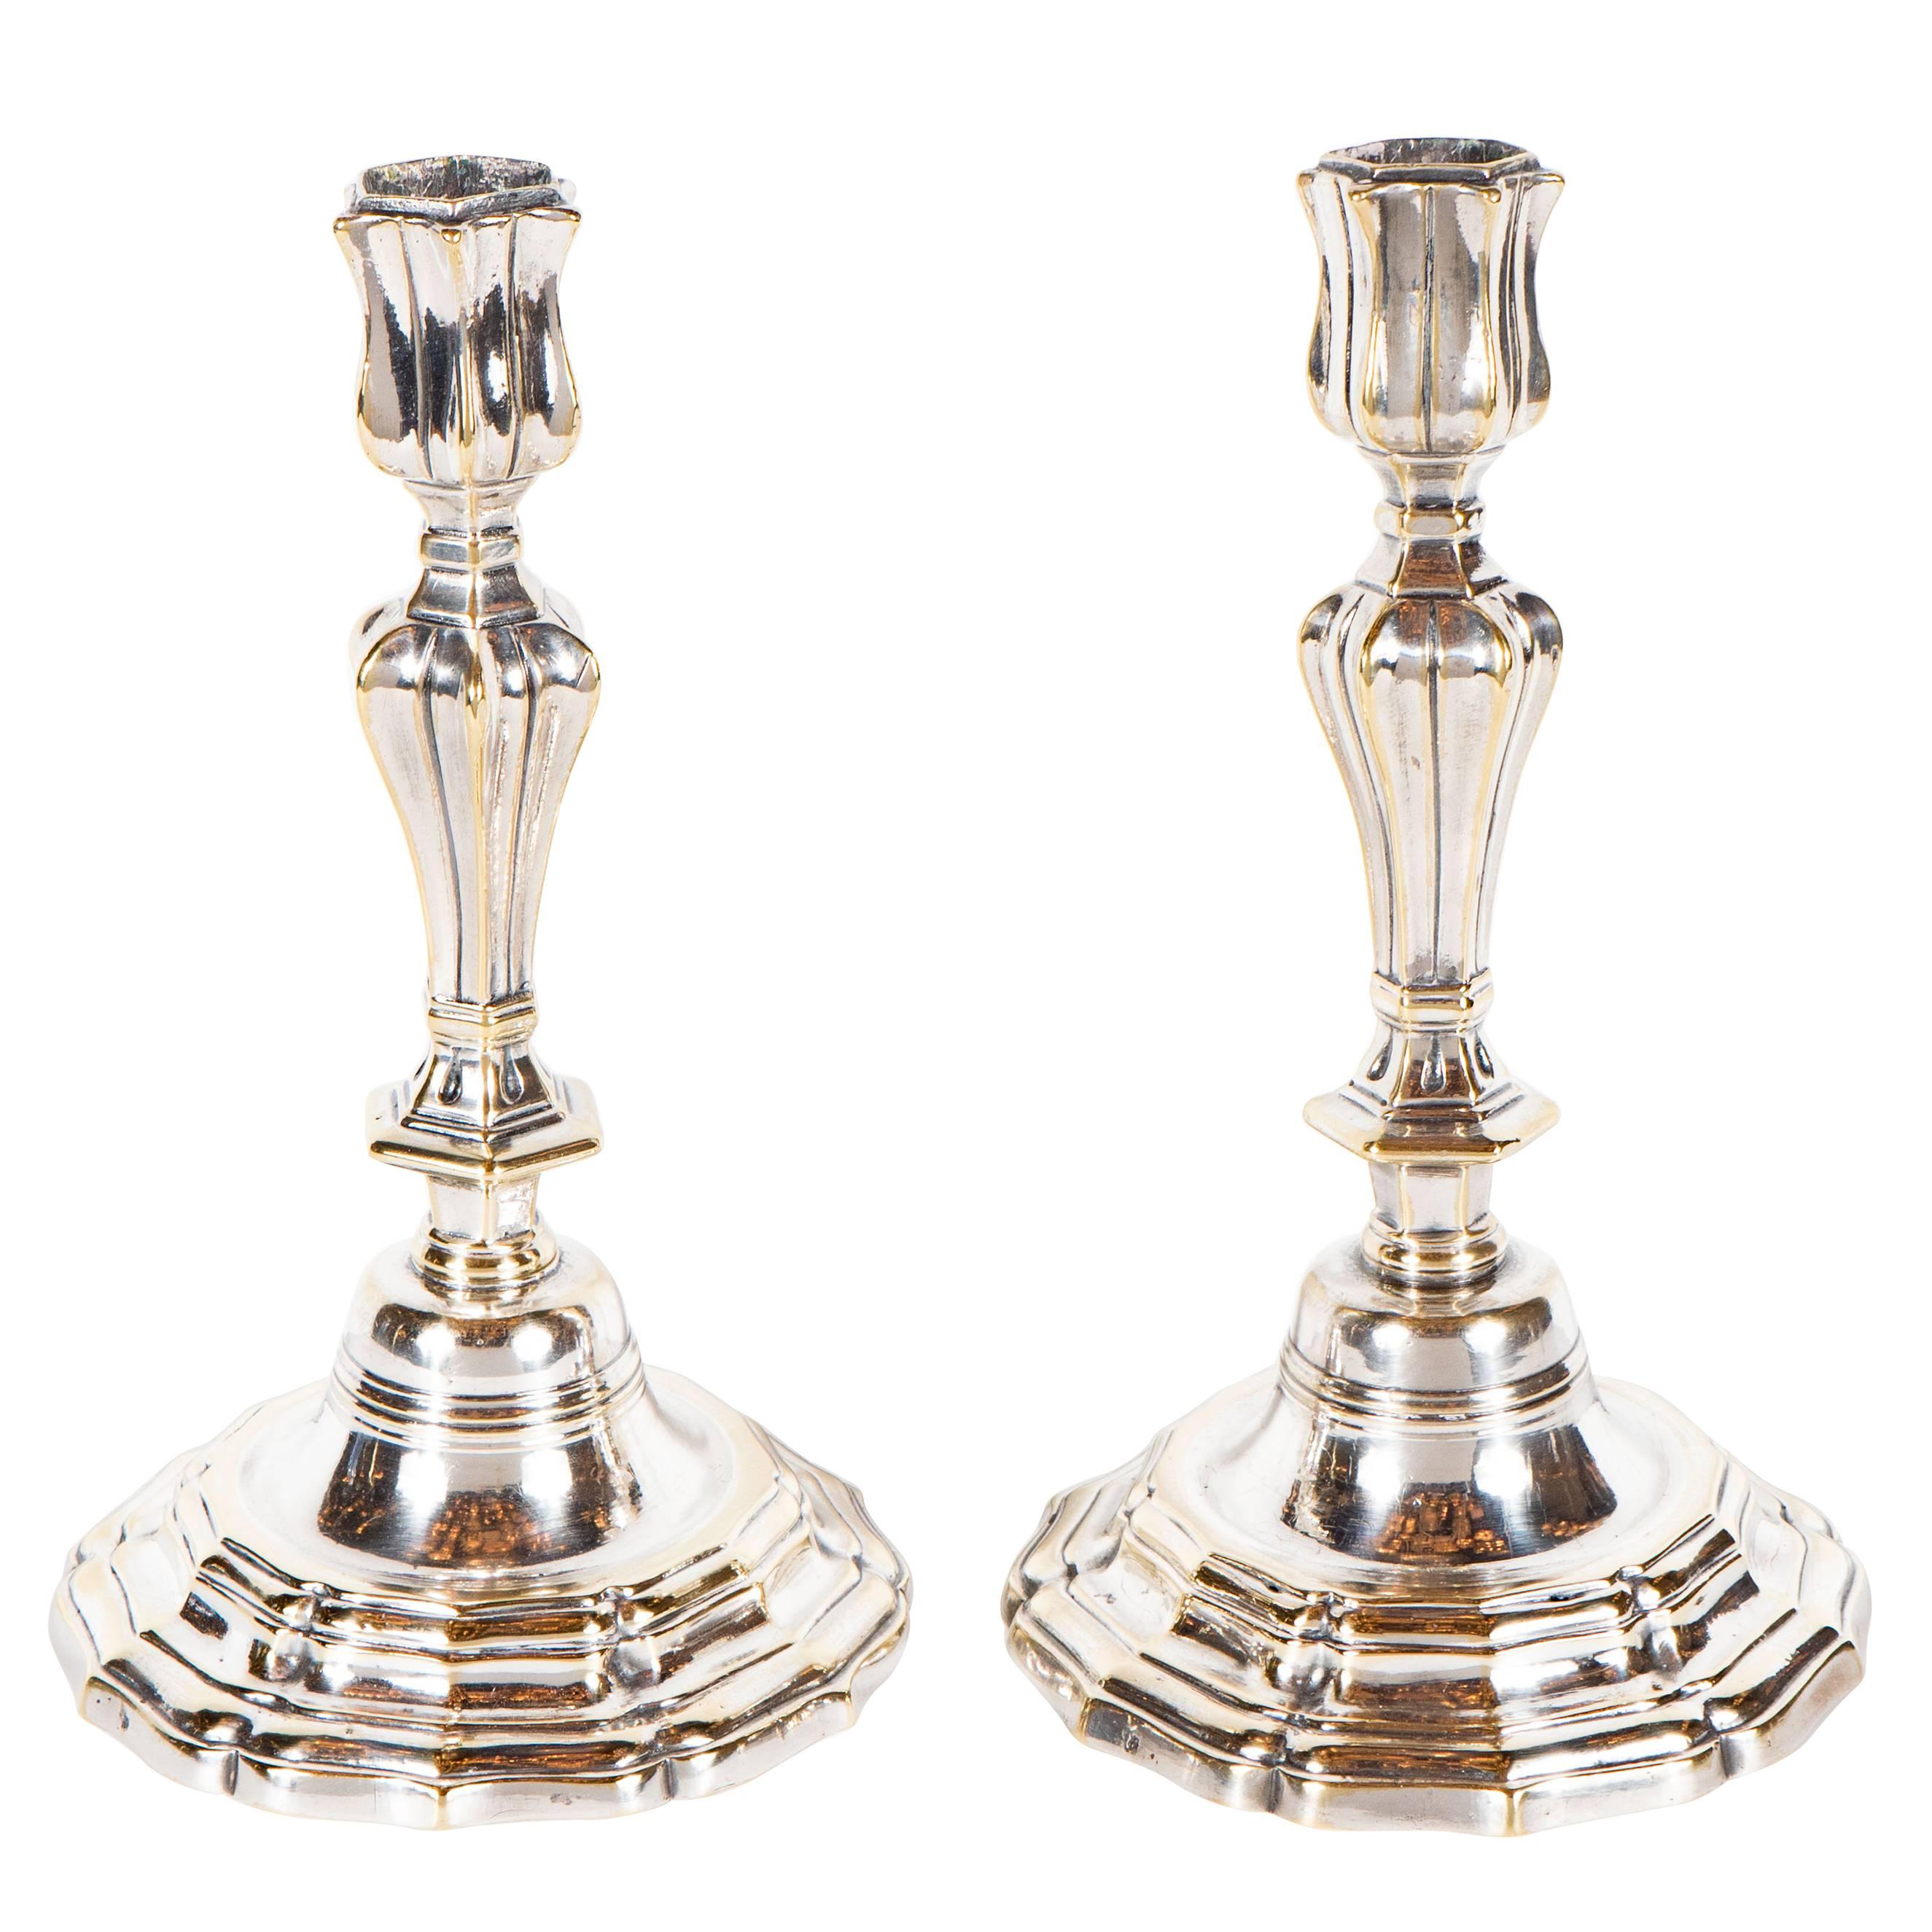 Elegant Pair of French Silvered Bronze George III Candlesticks